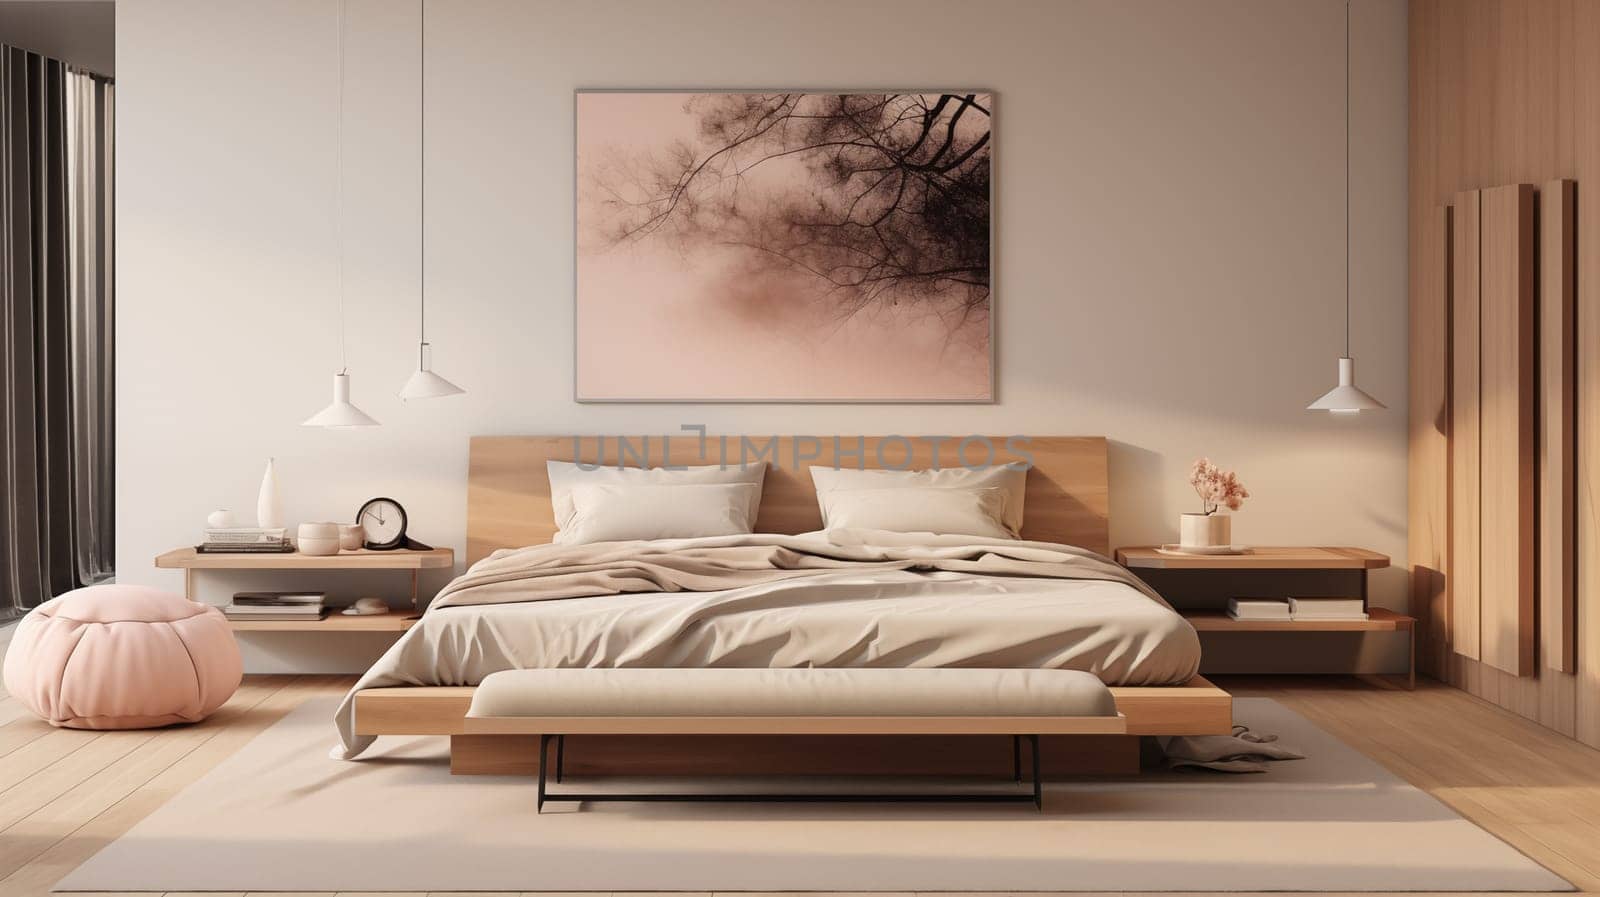 Elegant bedroom interior with natural wood furniture, soft lighting, and a large abstract art piece by Zakharova